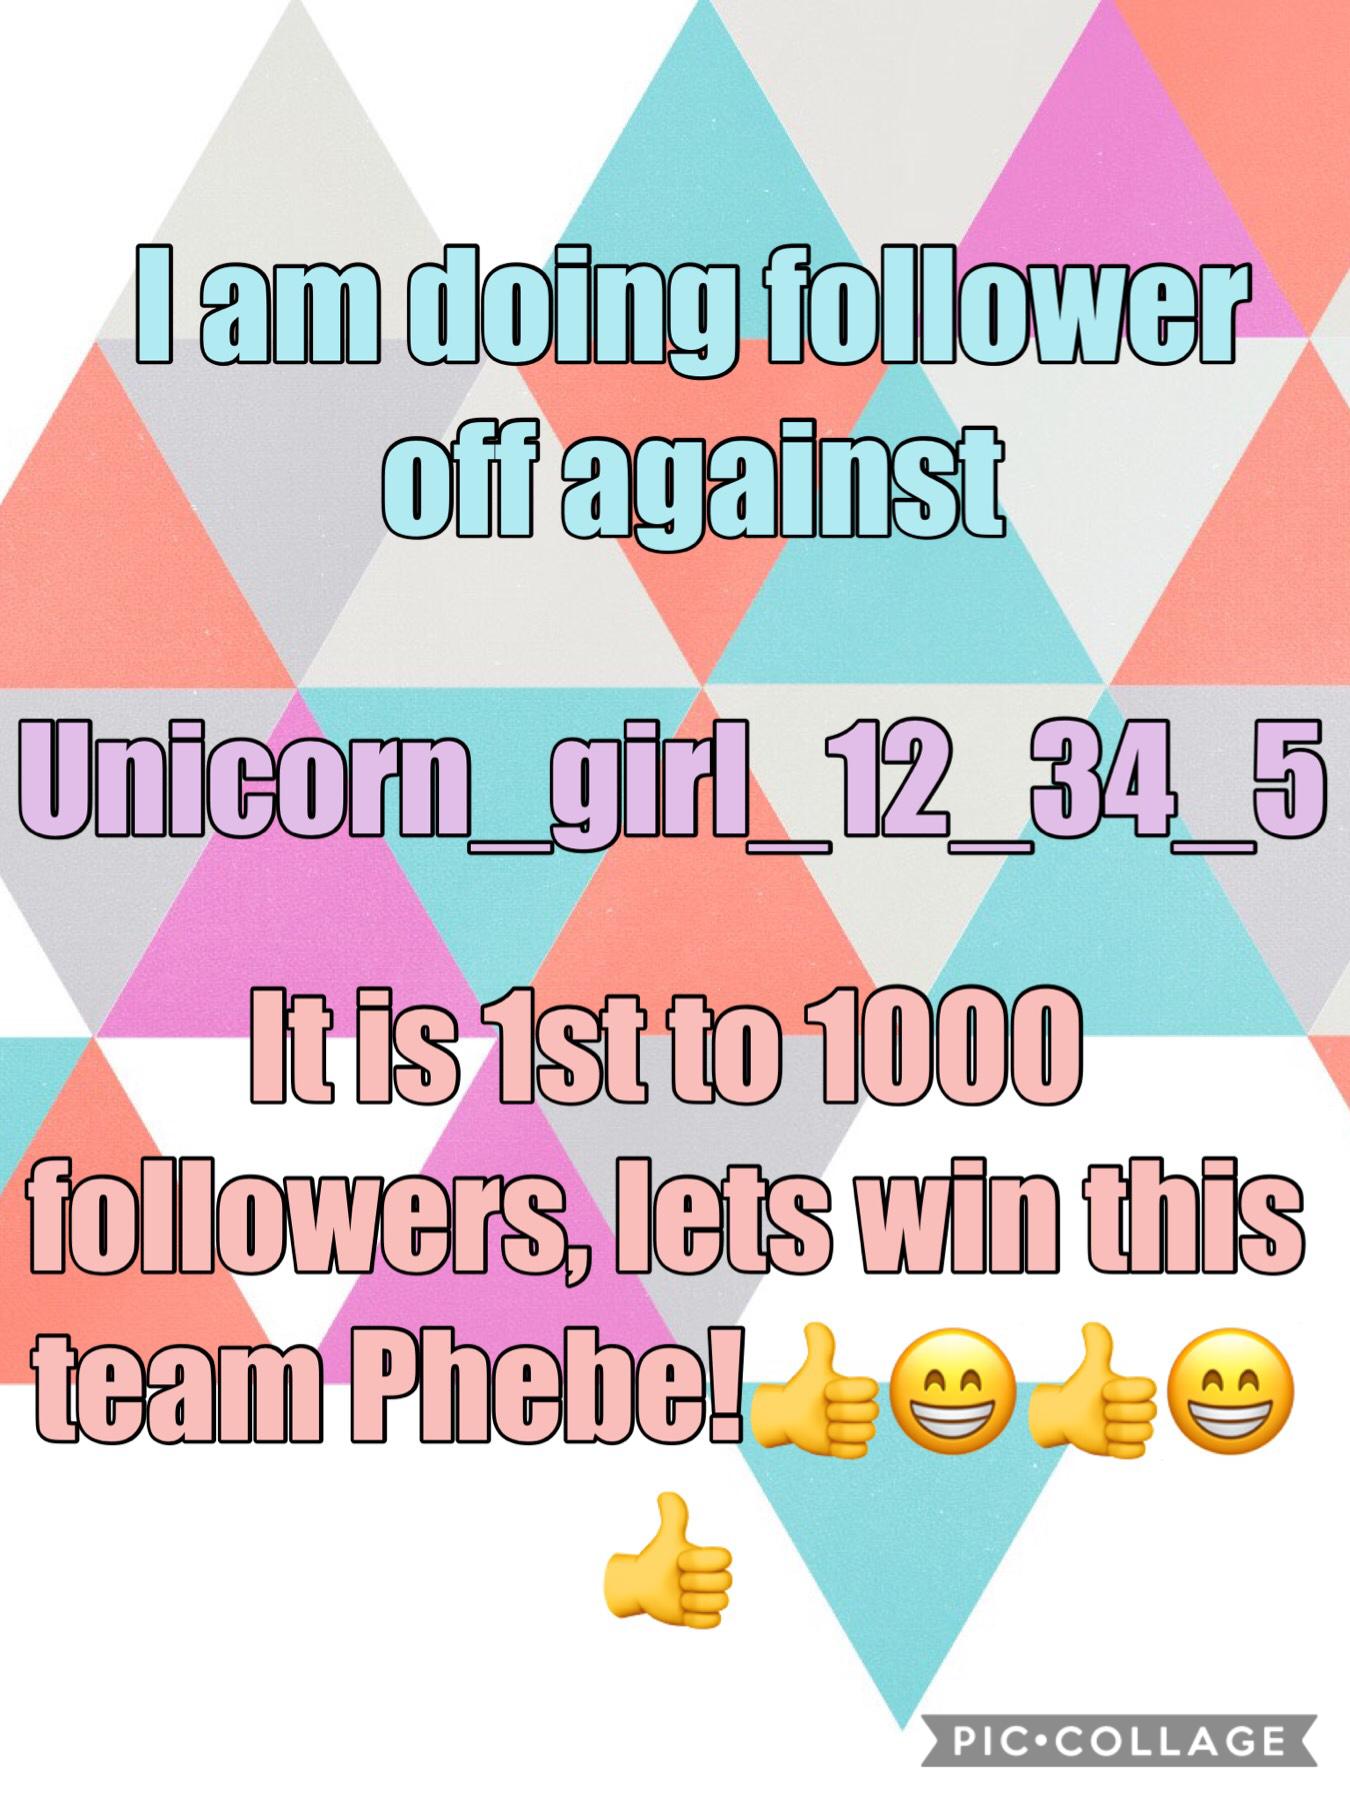 Tap
Follow me and coment what team your on team Phebe or team Unicorn